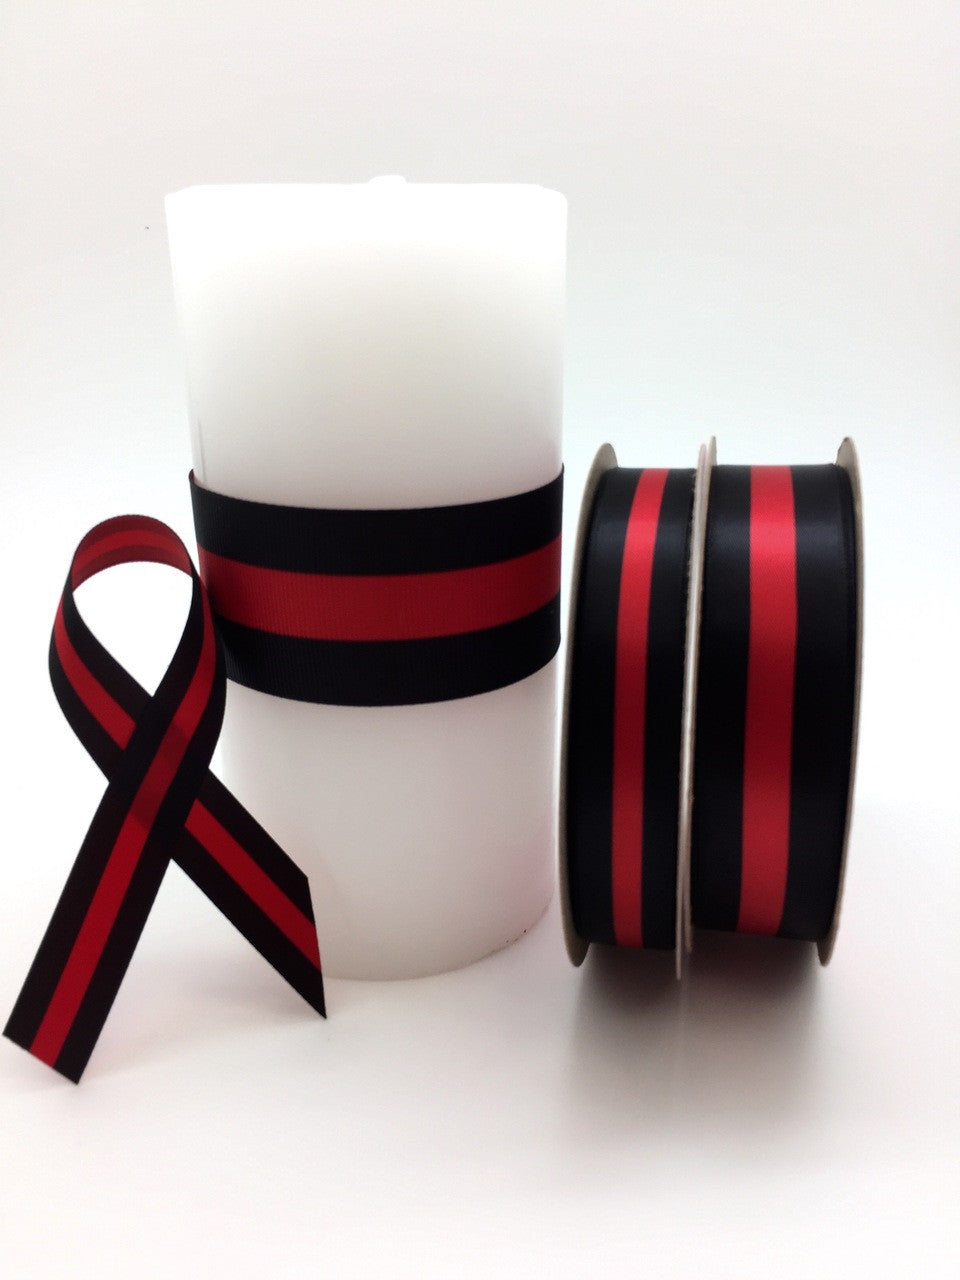 Our thin red line ribbon is ideal for creating awareness ribbons or using for memorial services honoring our fallen heroes.